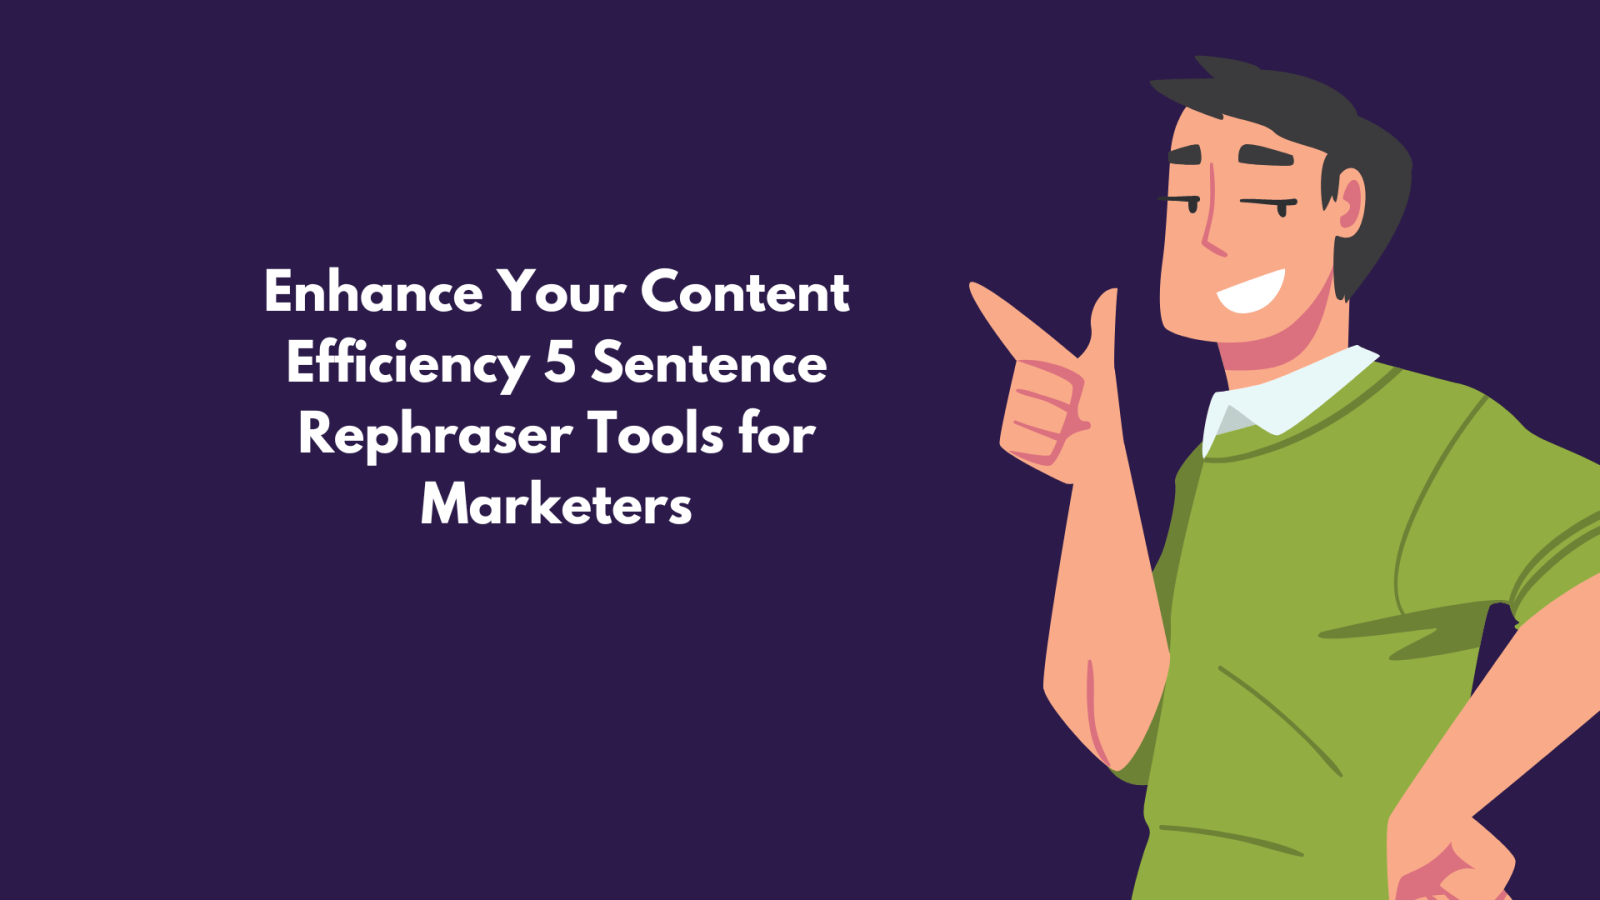 Enhance Your Content Efficiency 5 Sentence Rephraser Tools for Marketers